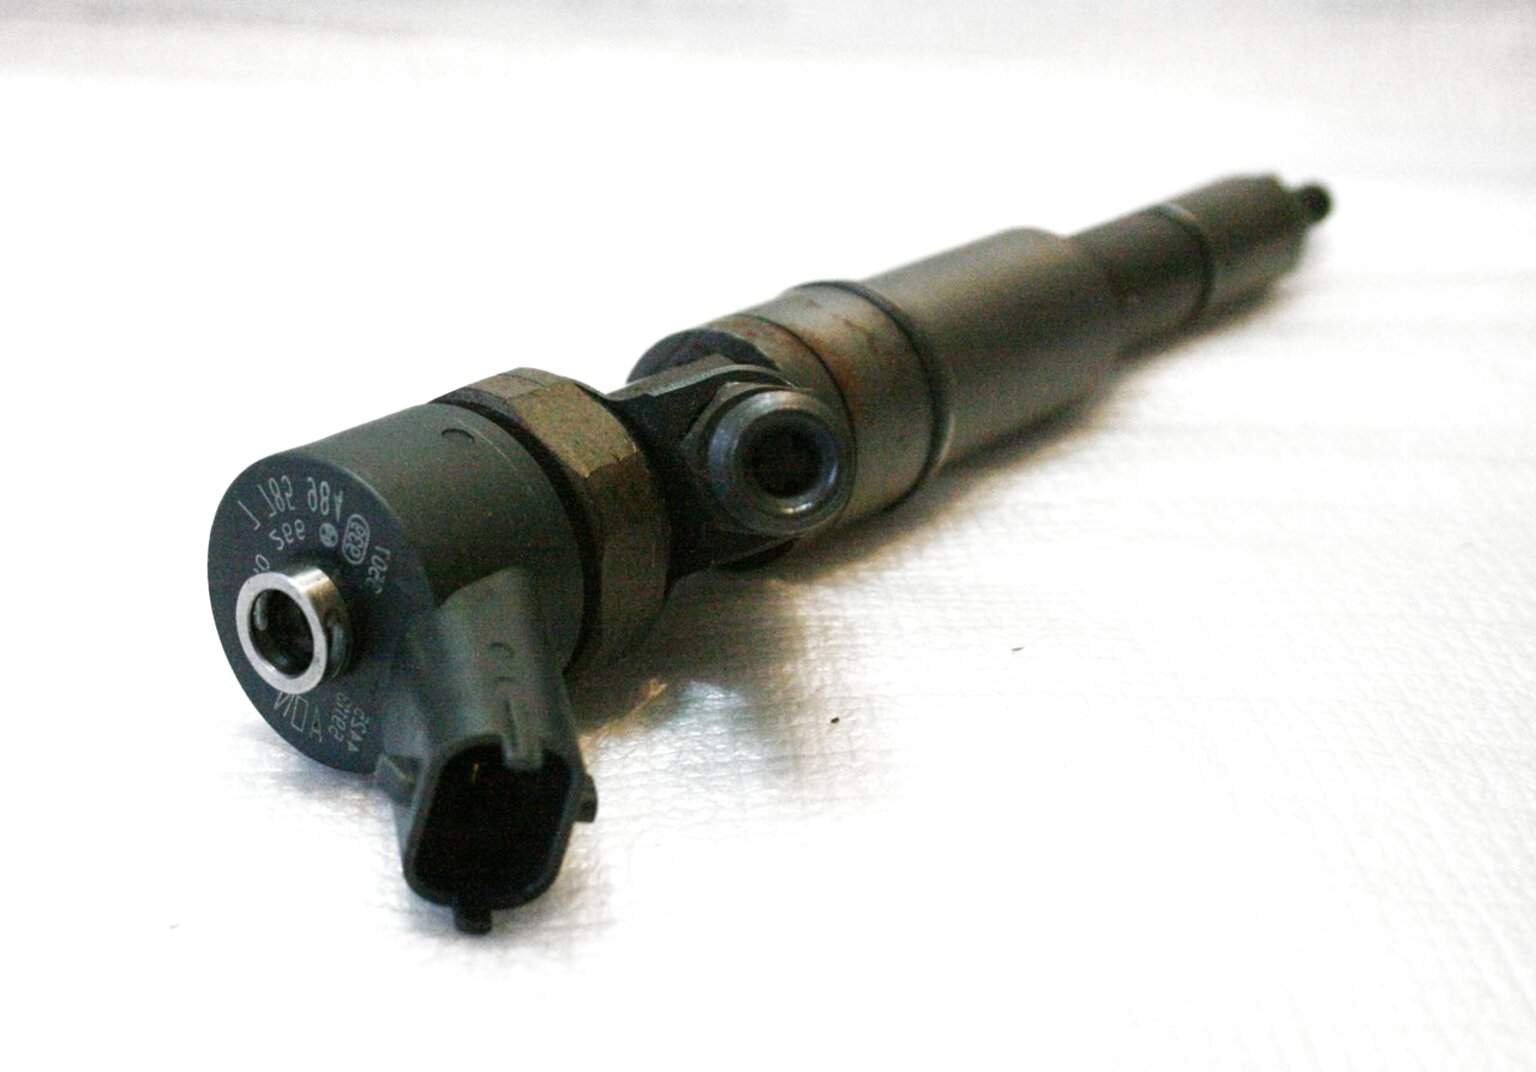 Bmw E39 530D Injector for sale in UK View 60 bargains